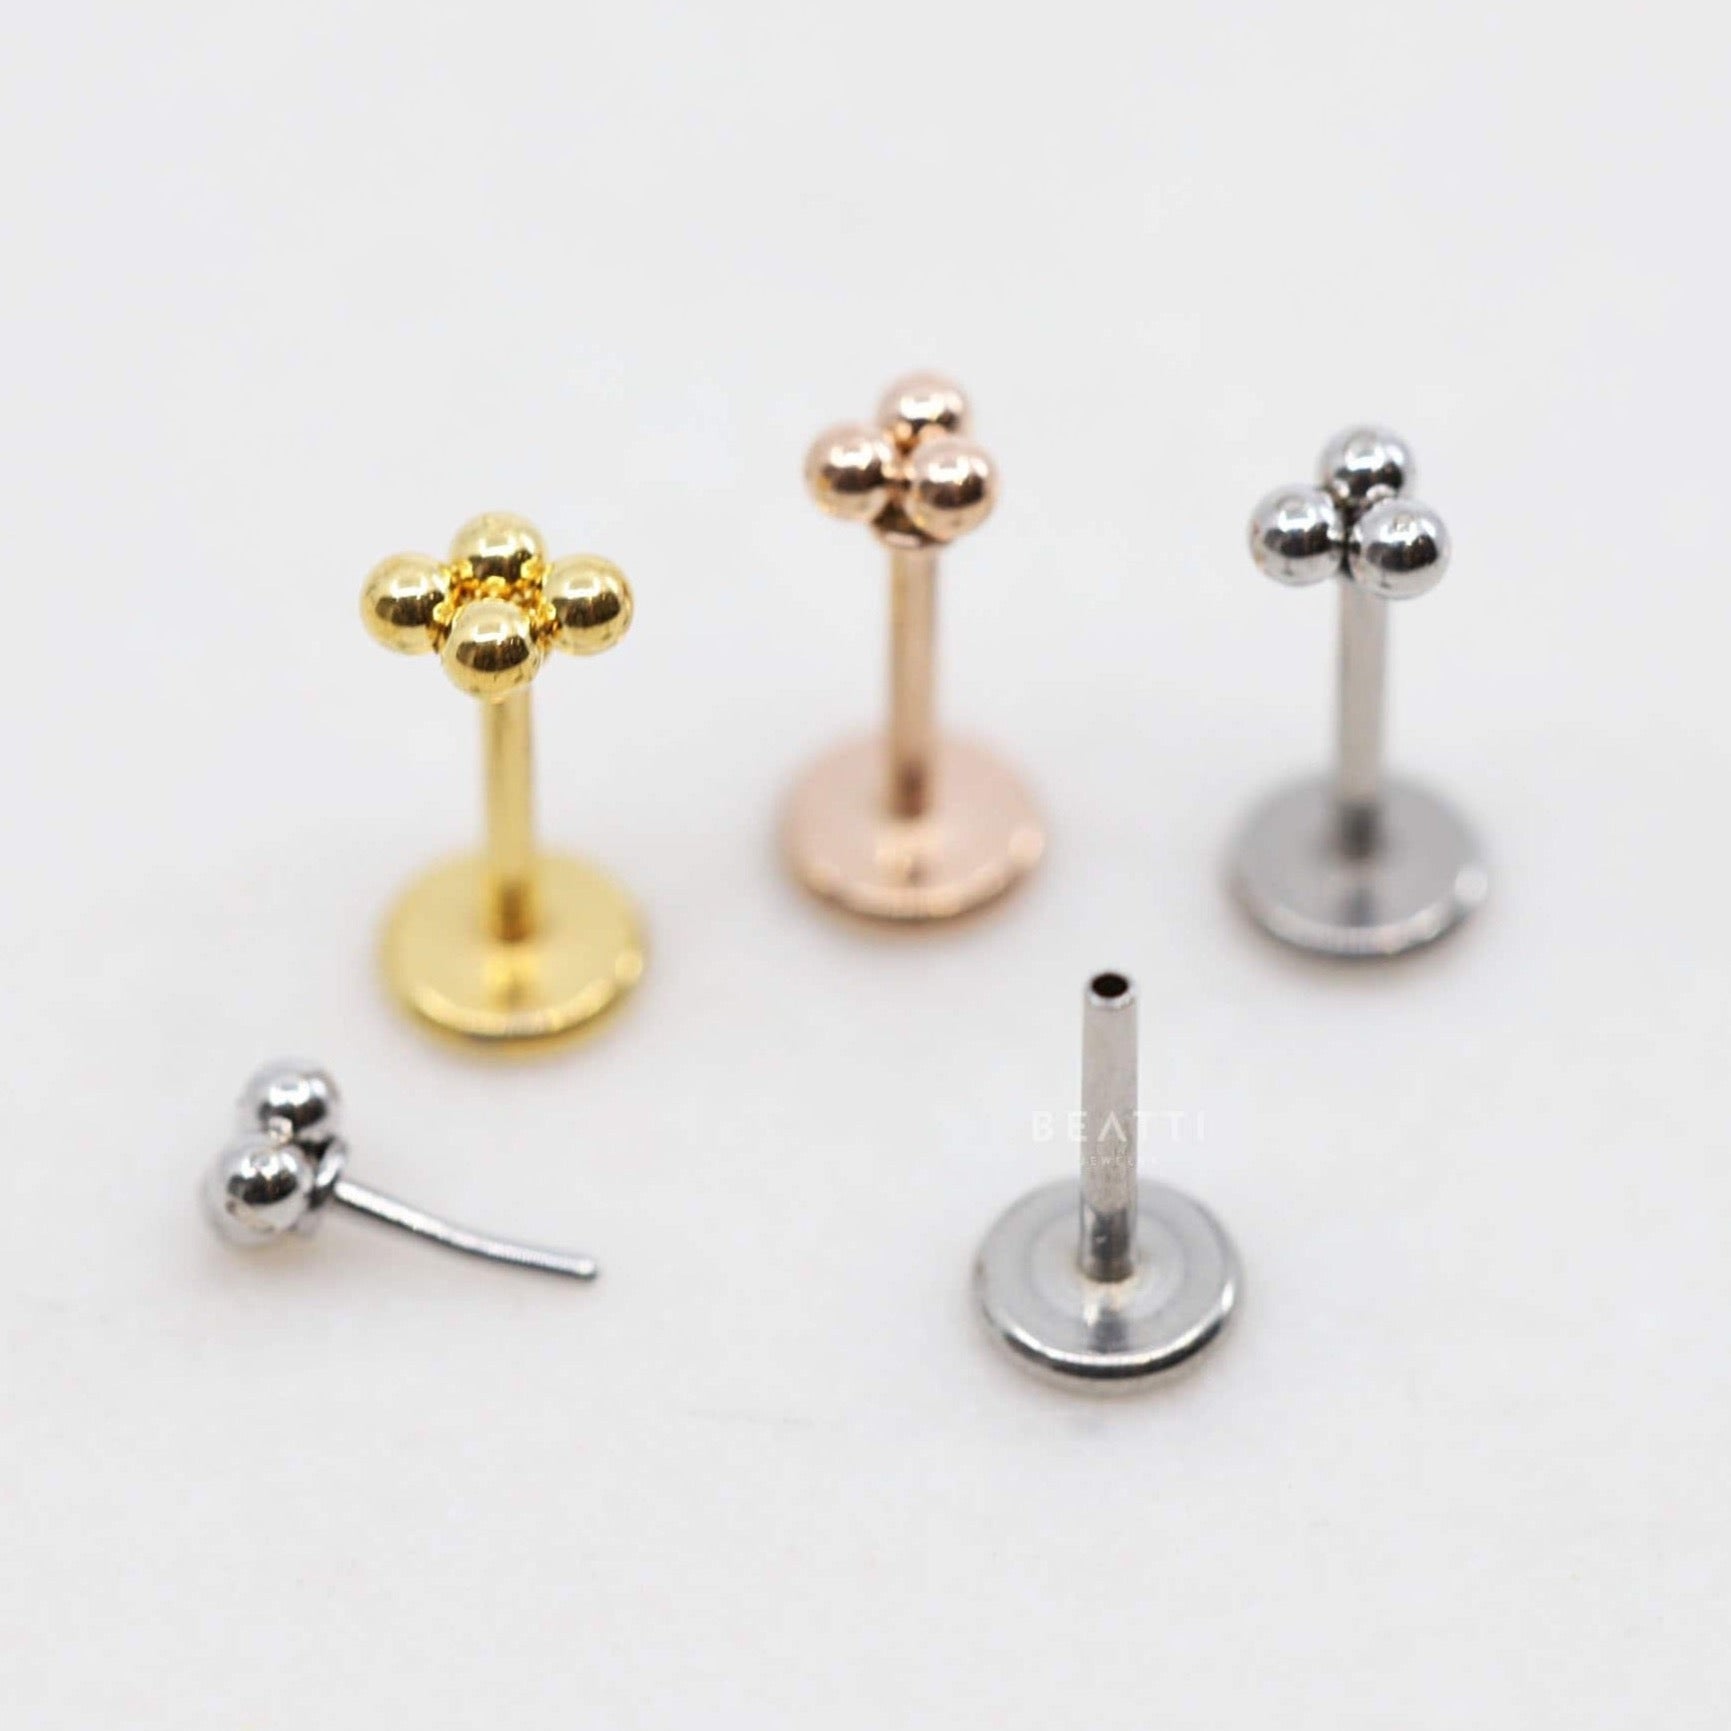 20G/18G/16G Tiny Star Flat Back Labret Stud 925 Sterling Silver Star Tragus  Stud Flat Back Earring Helix Conch Earring Cartilage 